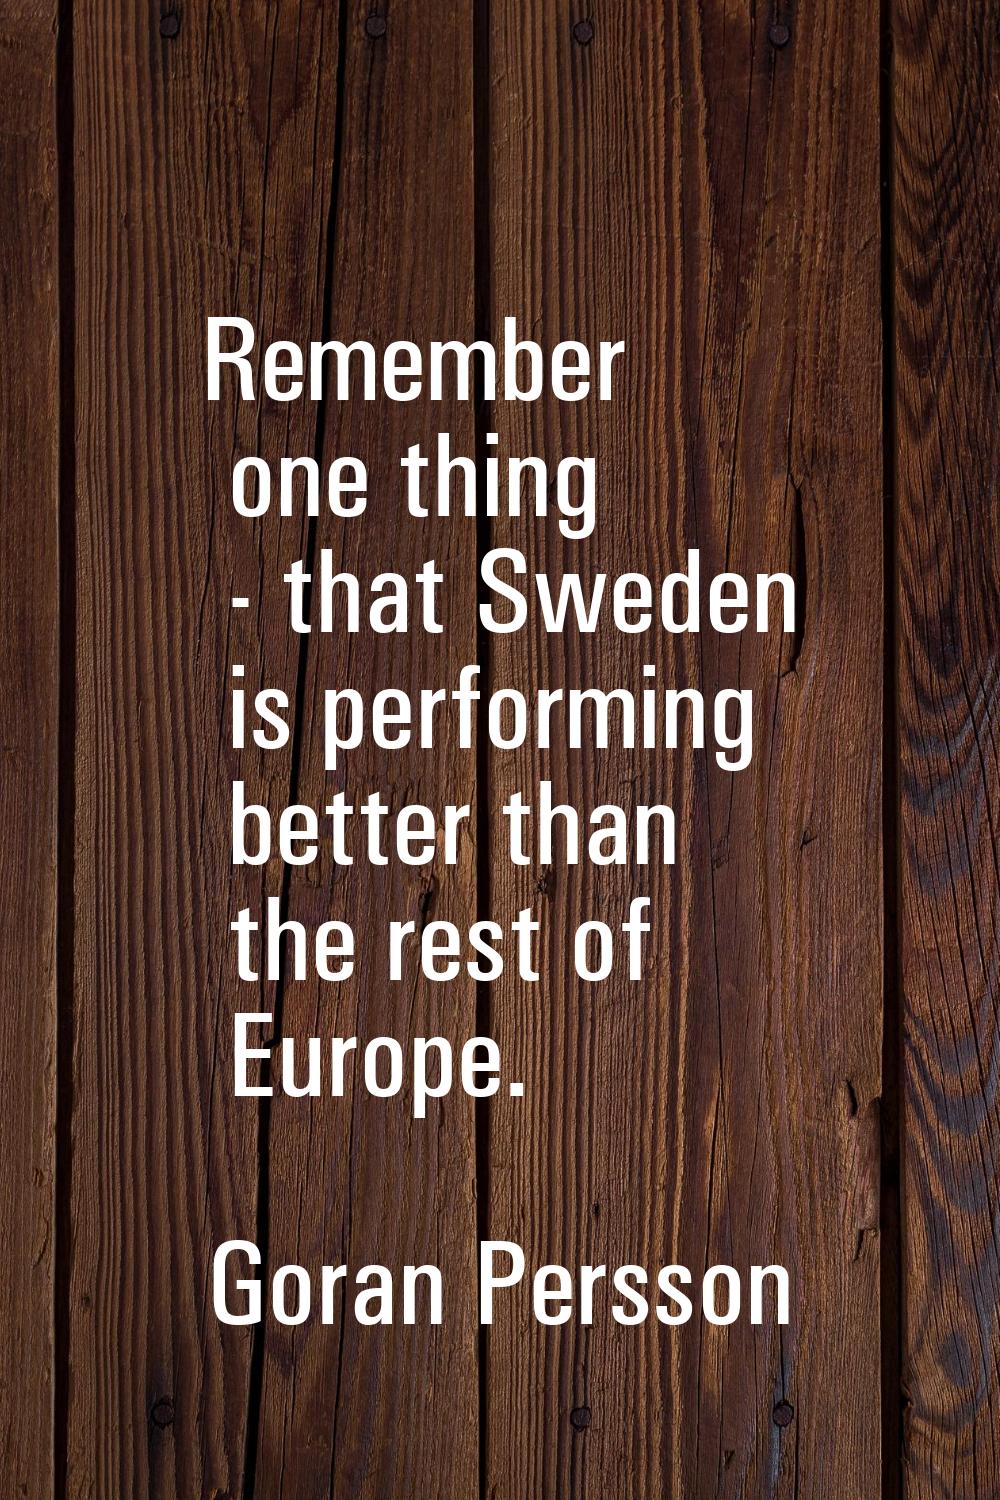 Remember one thing - that Sweden is performing better than the rest of Europe.